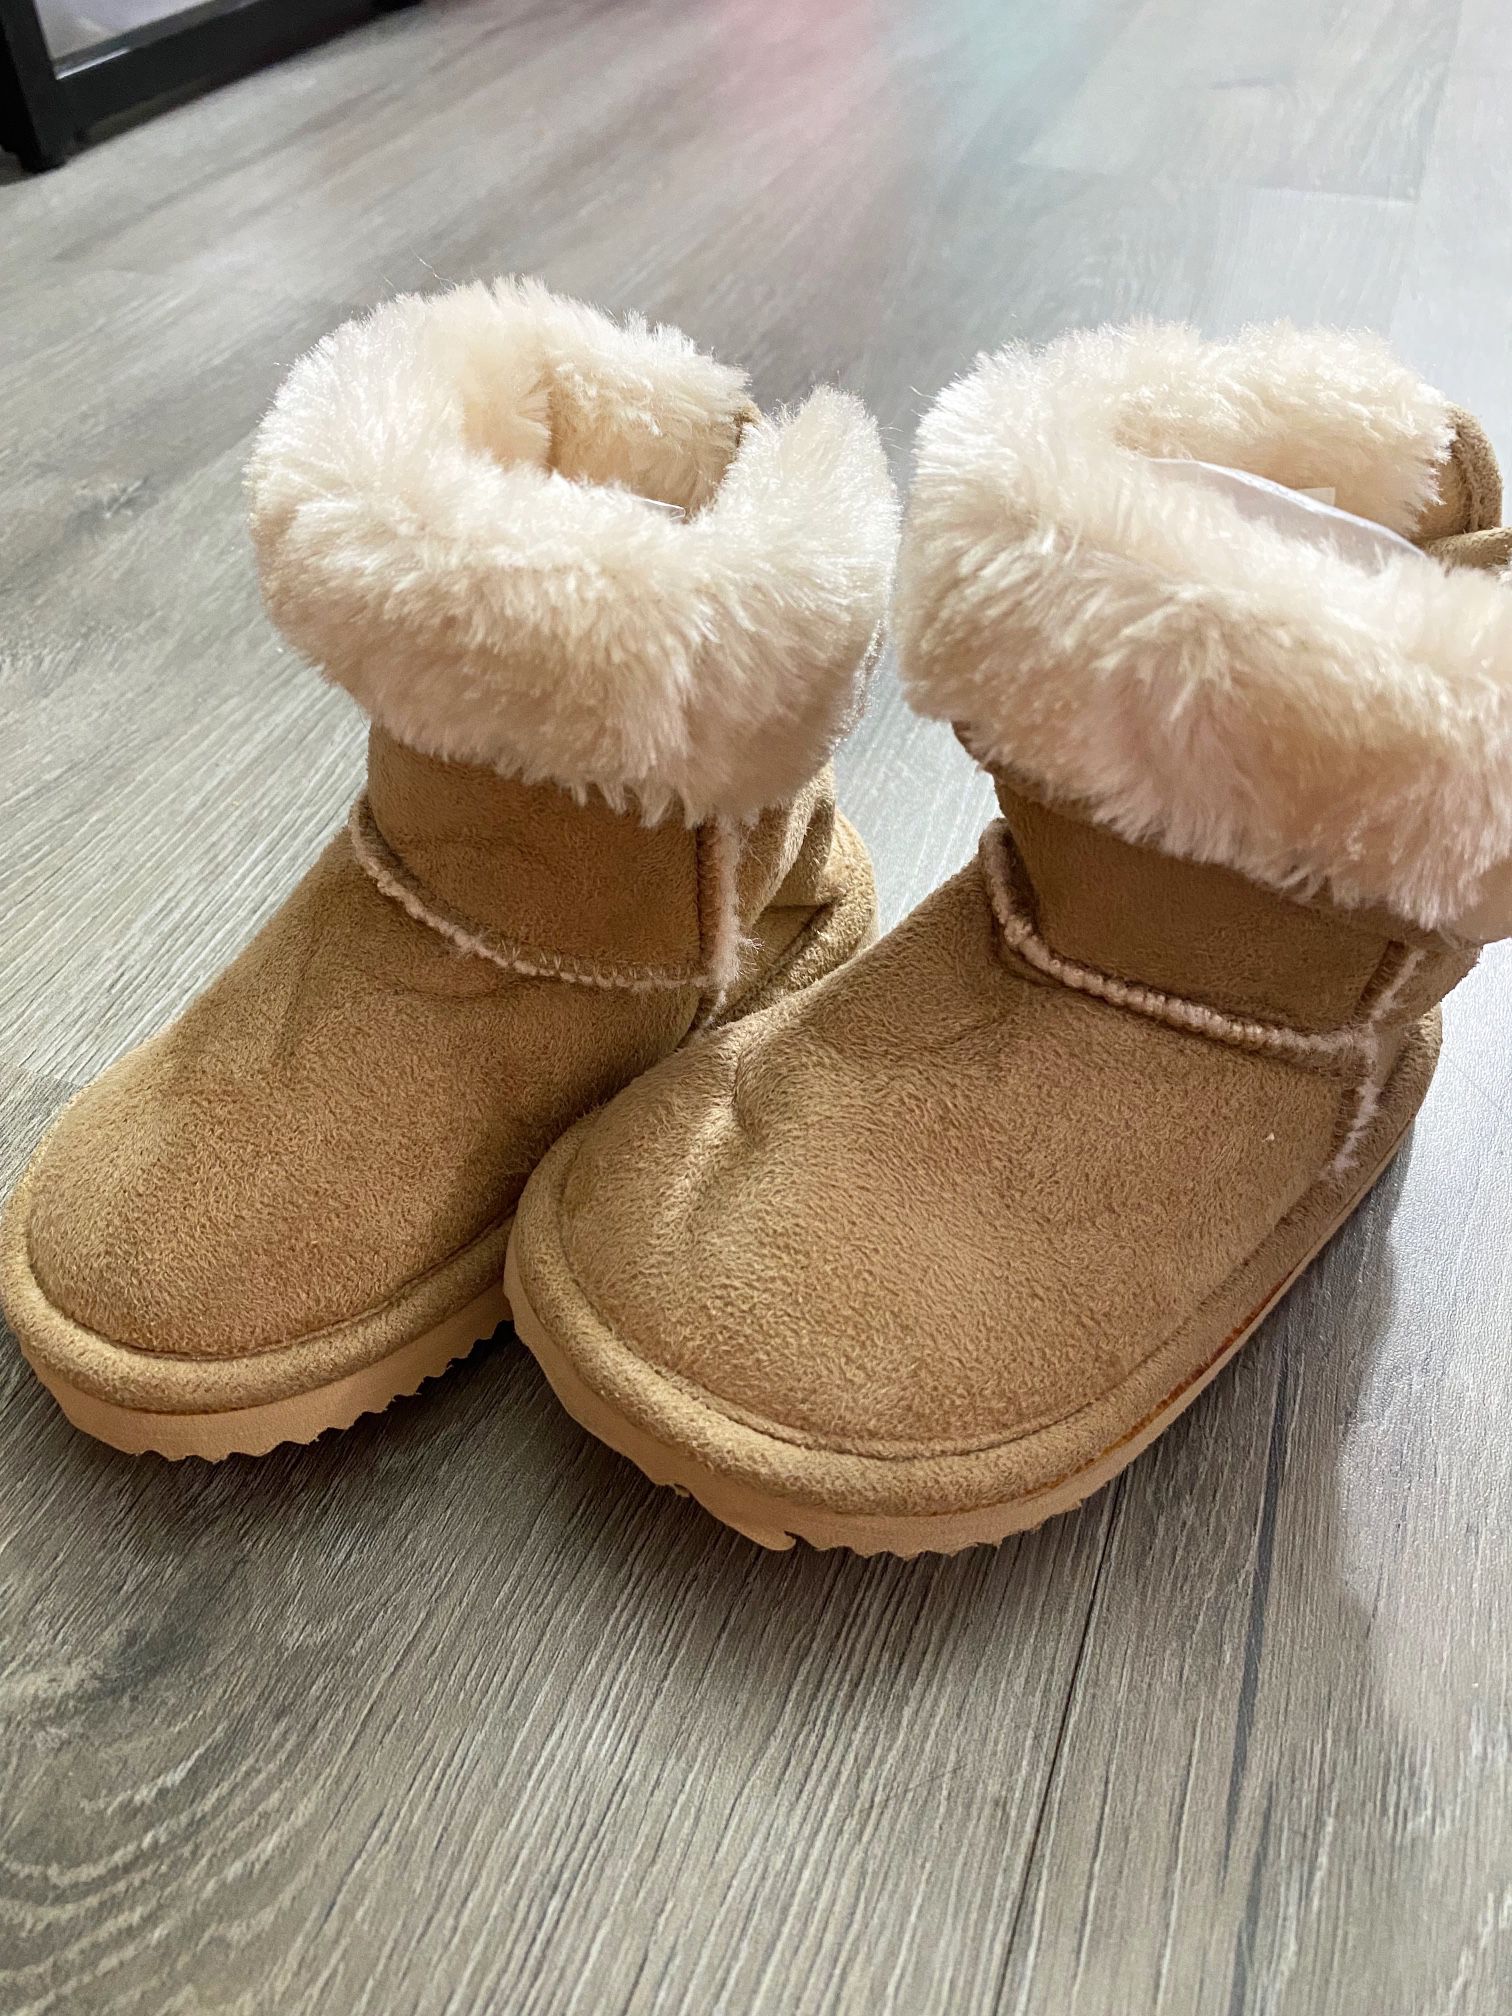 Combo 2 Baby Girl Shoes (H&M) Sz 4-5 US